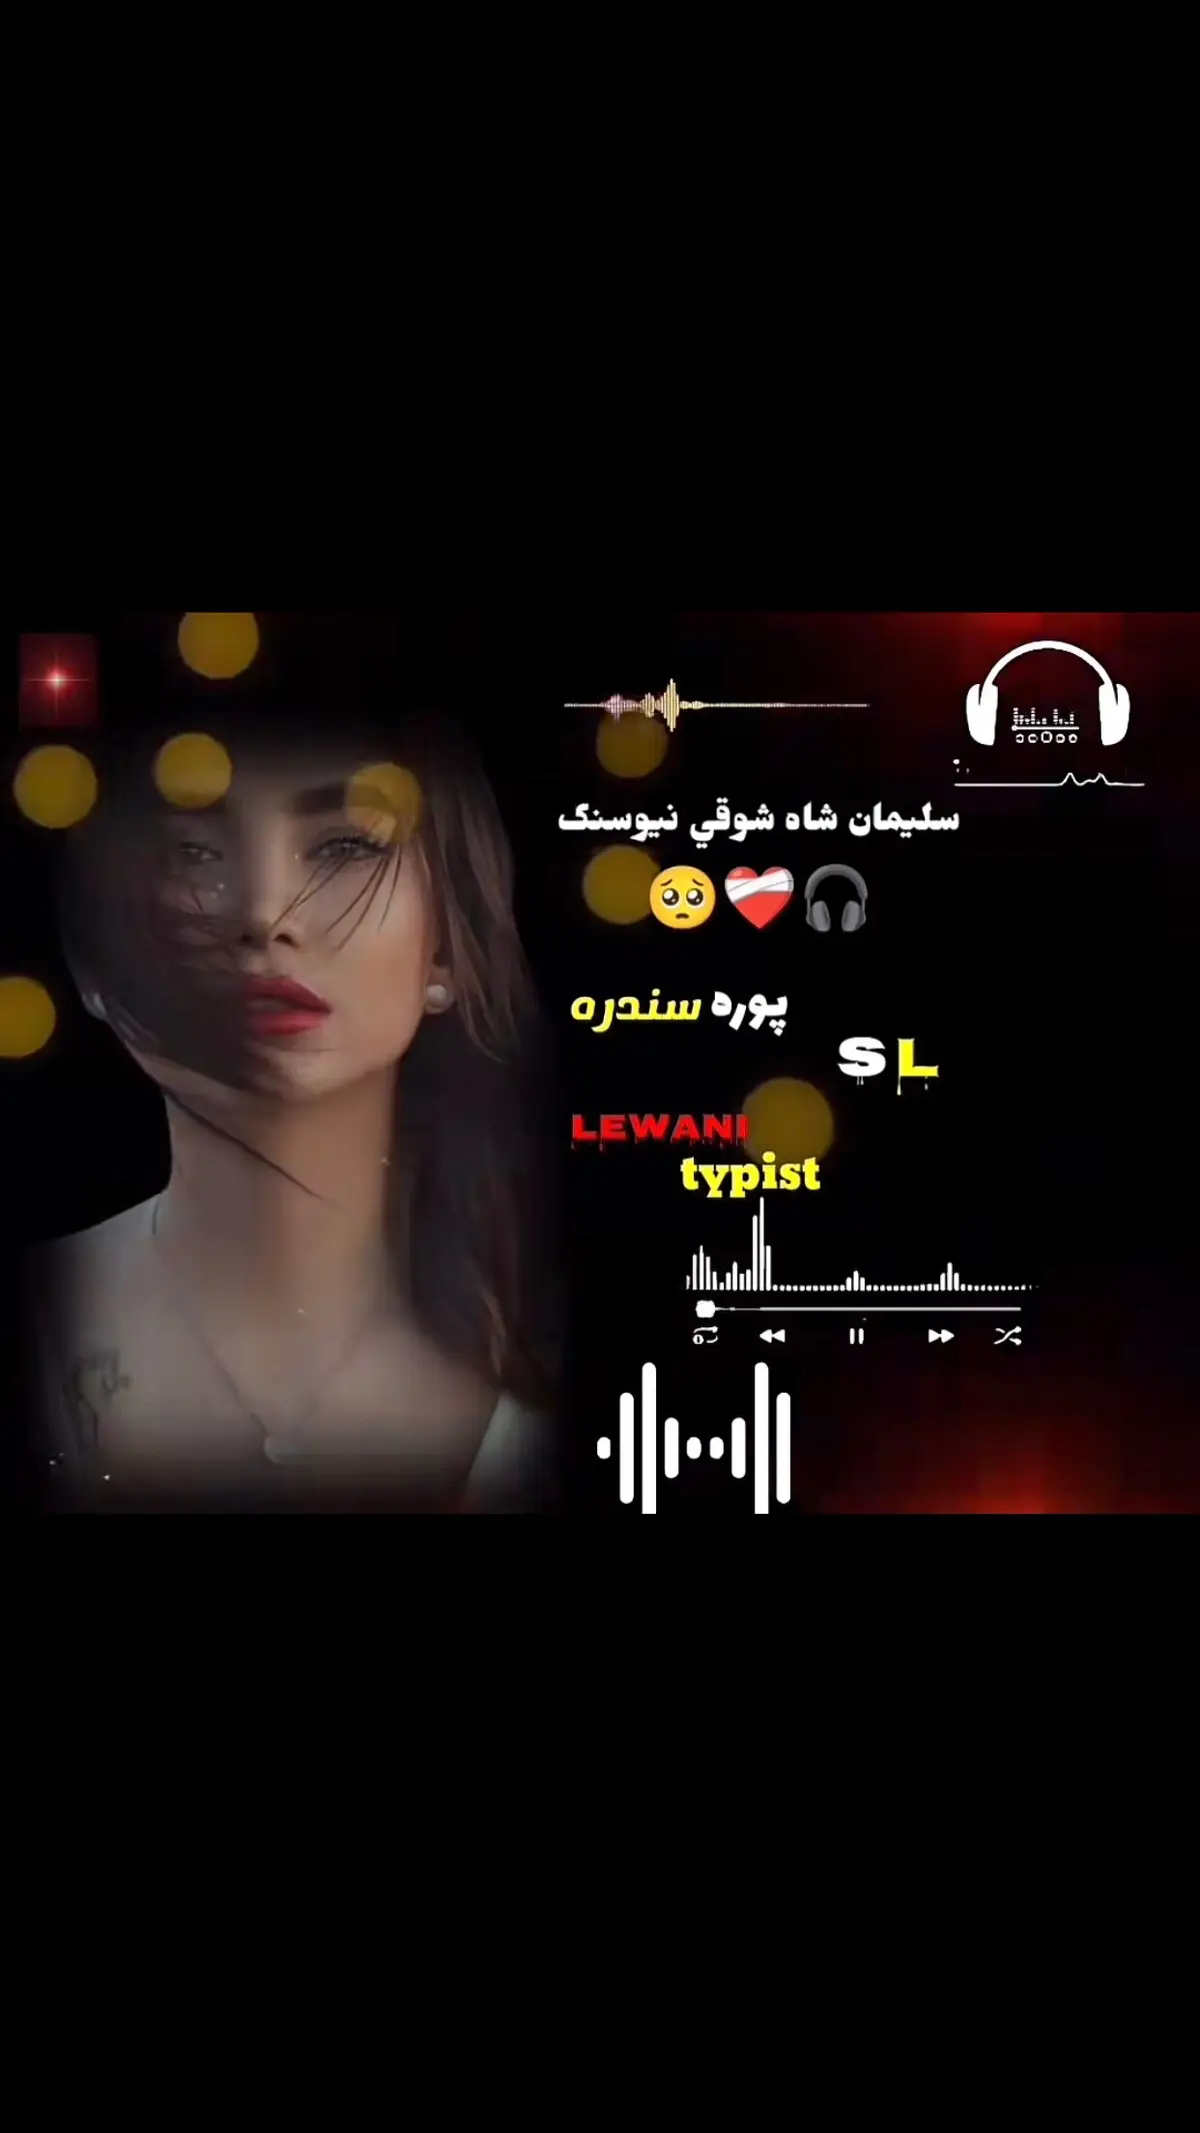 🔥#Pashto#song#🔥پشتو#سونگ🔥 #Viral#TikTok#palz#viral #video #New#account#palz#viral#song #Tik#tok#viral#song#palz#viral #Me#new#account#palz#video  #accounts#for#youforpage#flypシ  #youforpage😍 